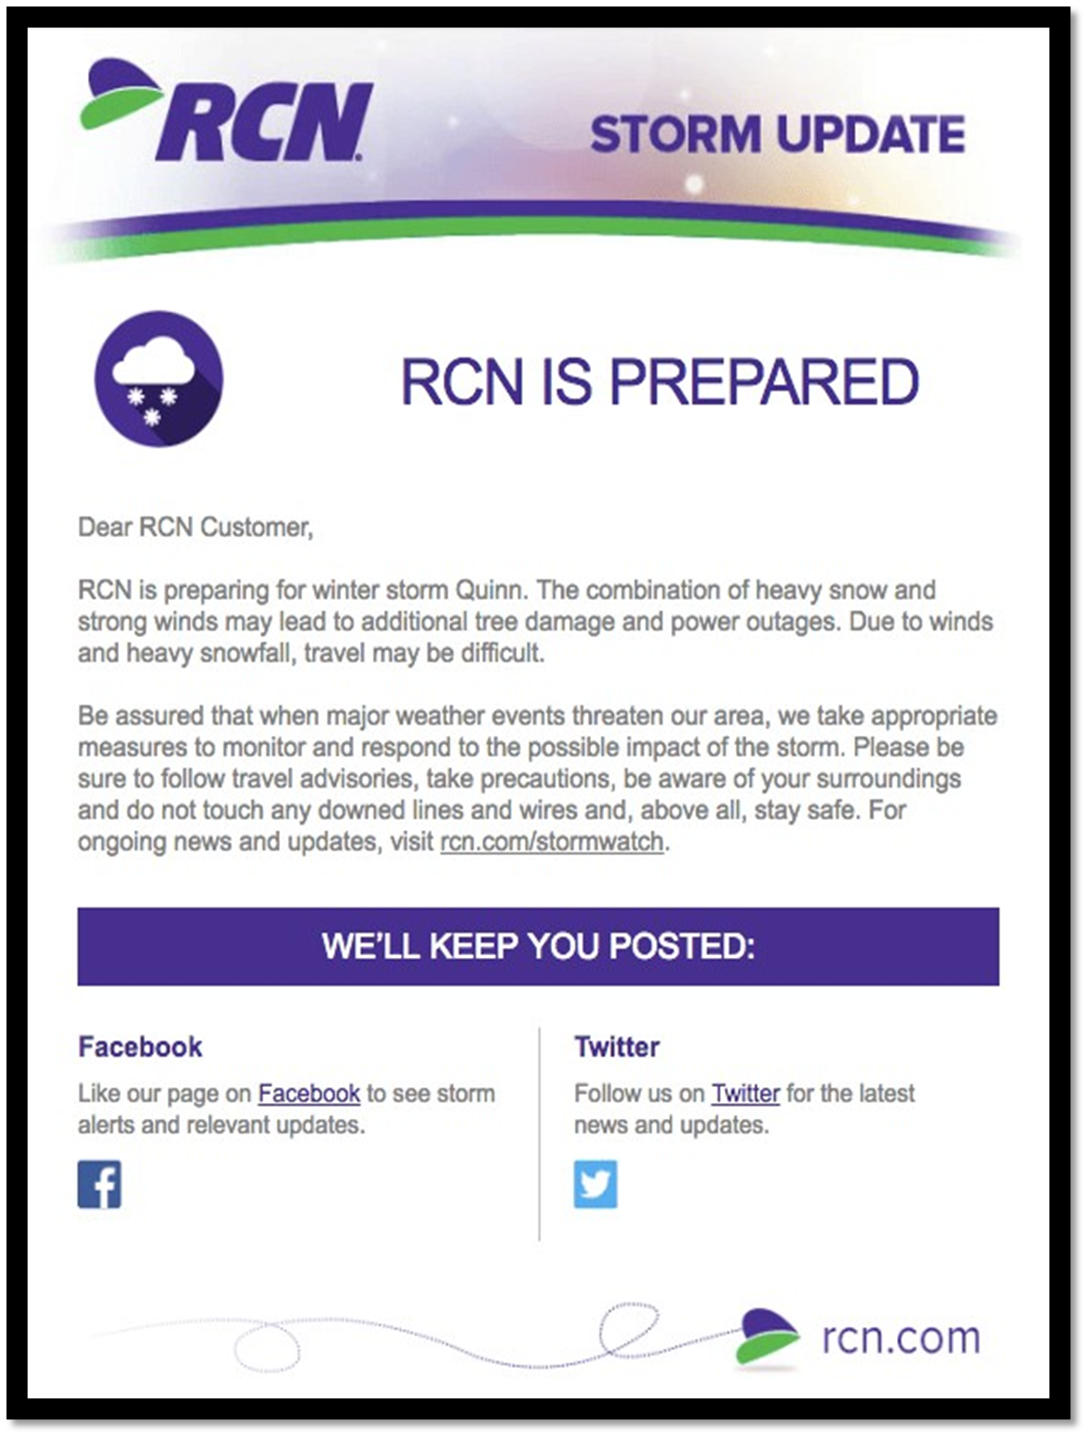 Update email template By RCN to their customers 